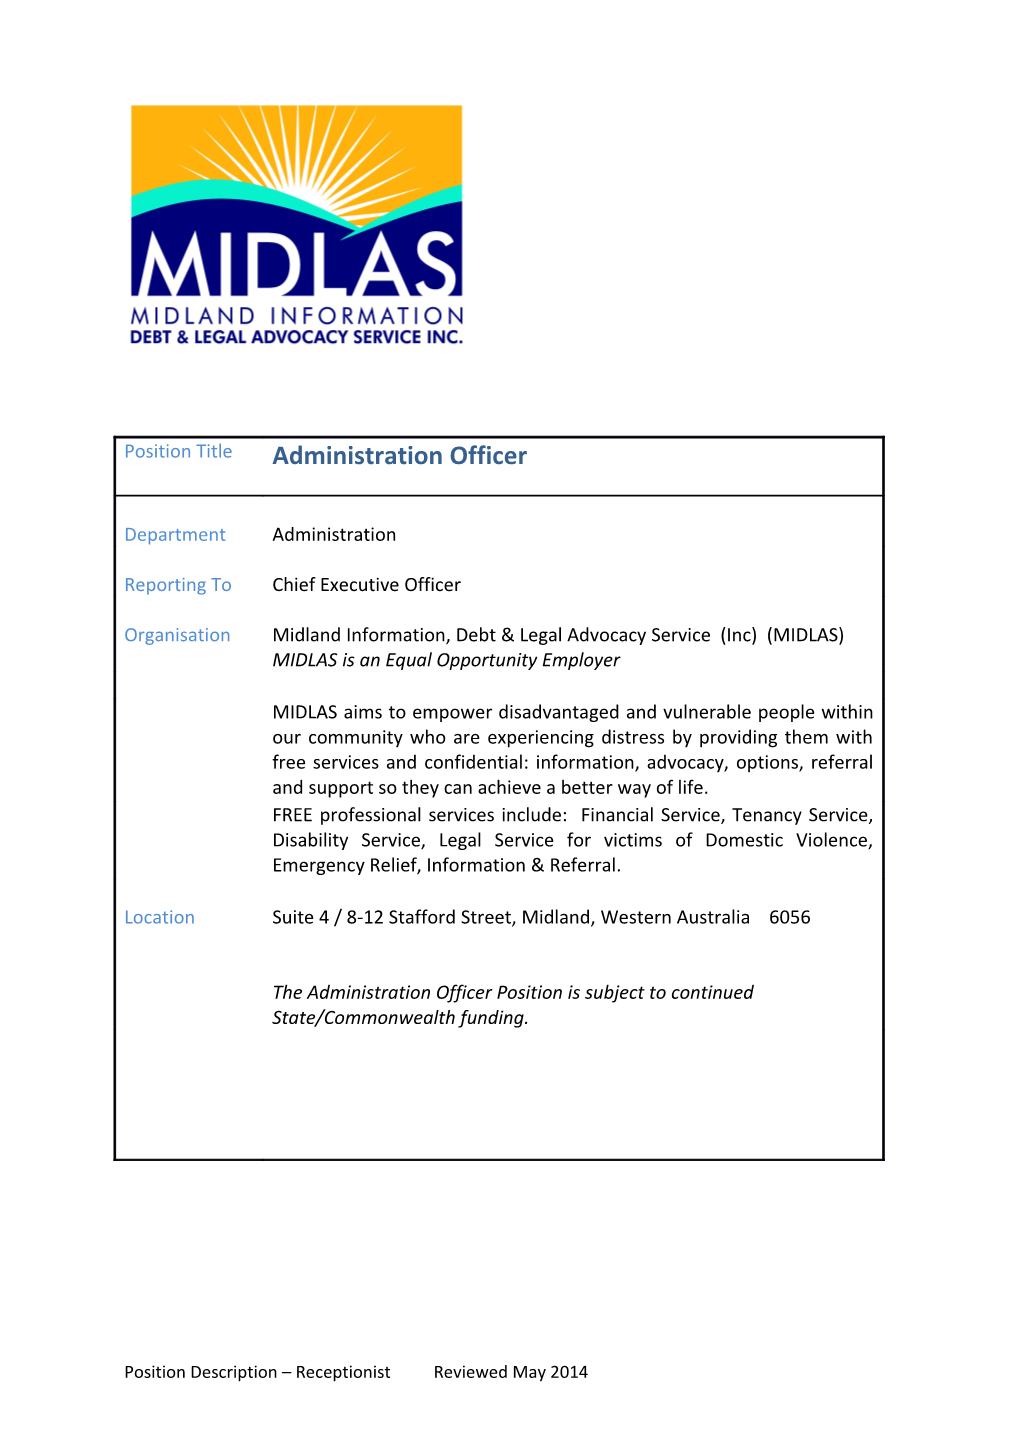 Position Description Receptionist Reviewed May 2014